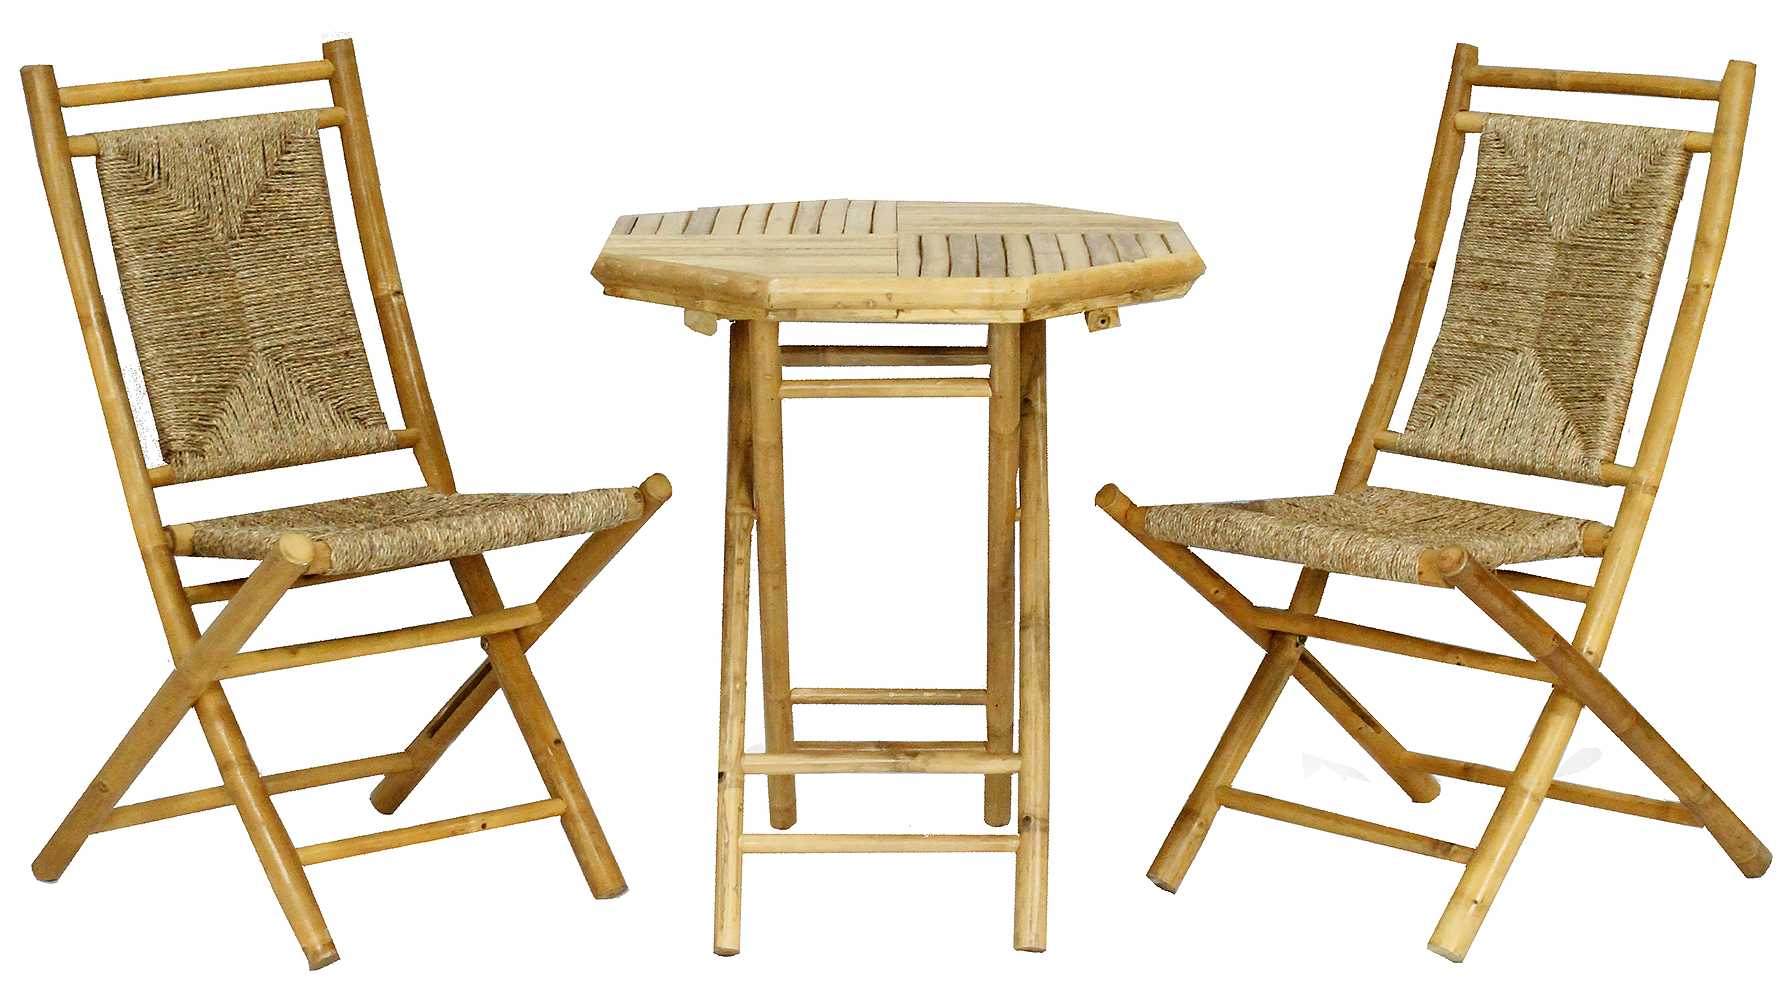 20" X 15" X 36" Natural Bamboo Natural Sea Grass Bamboo Weave set of Chairs and a Table